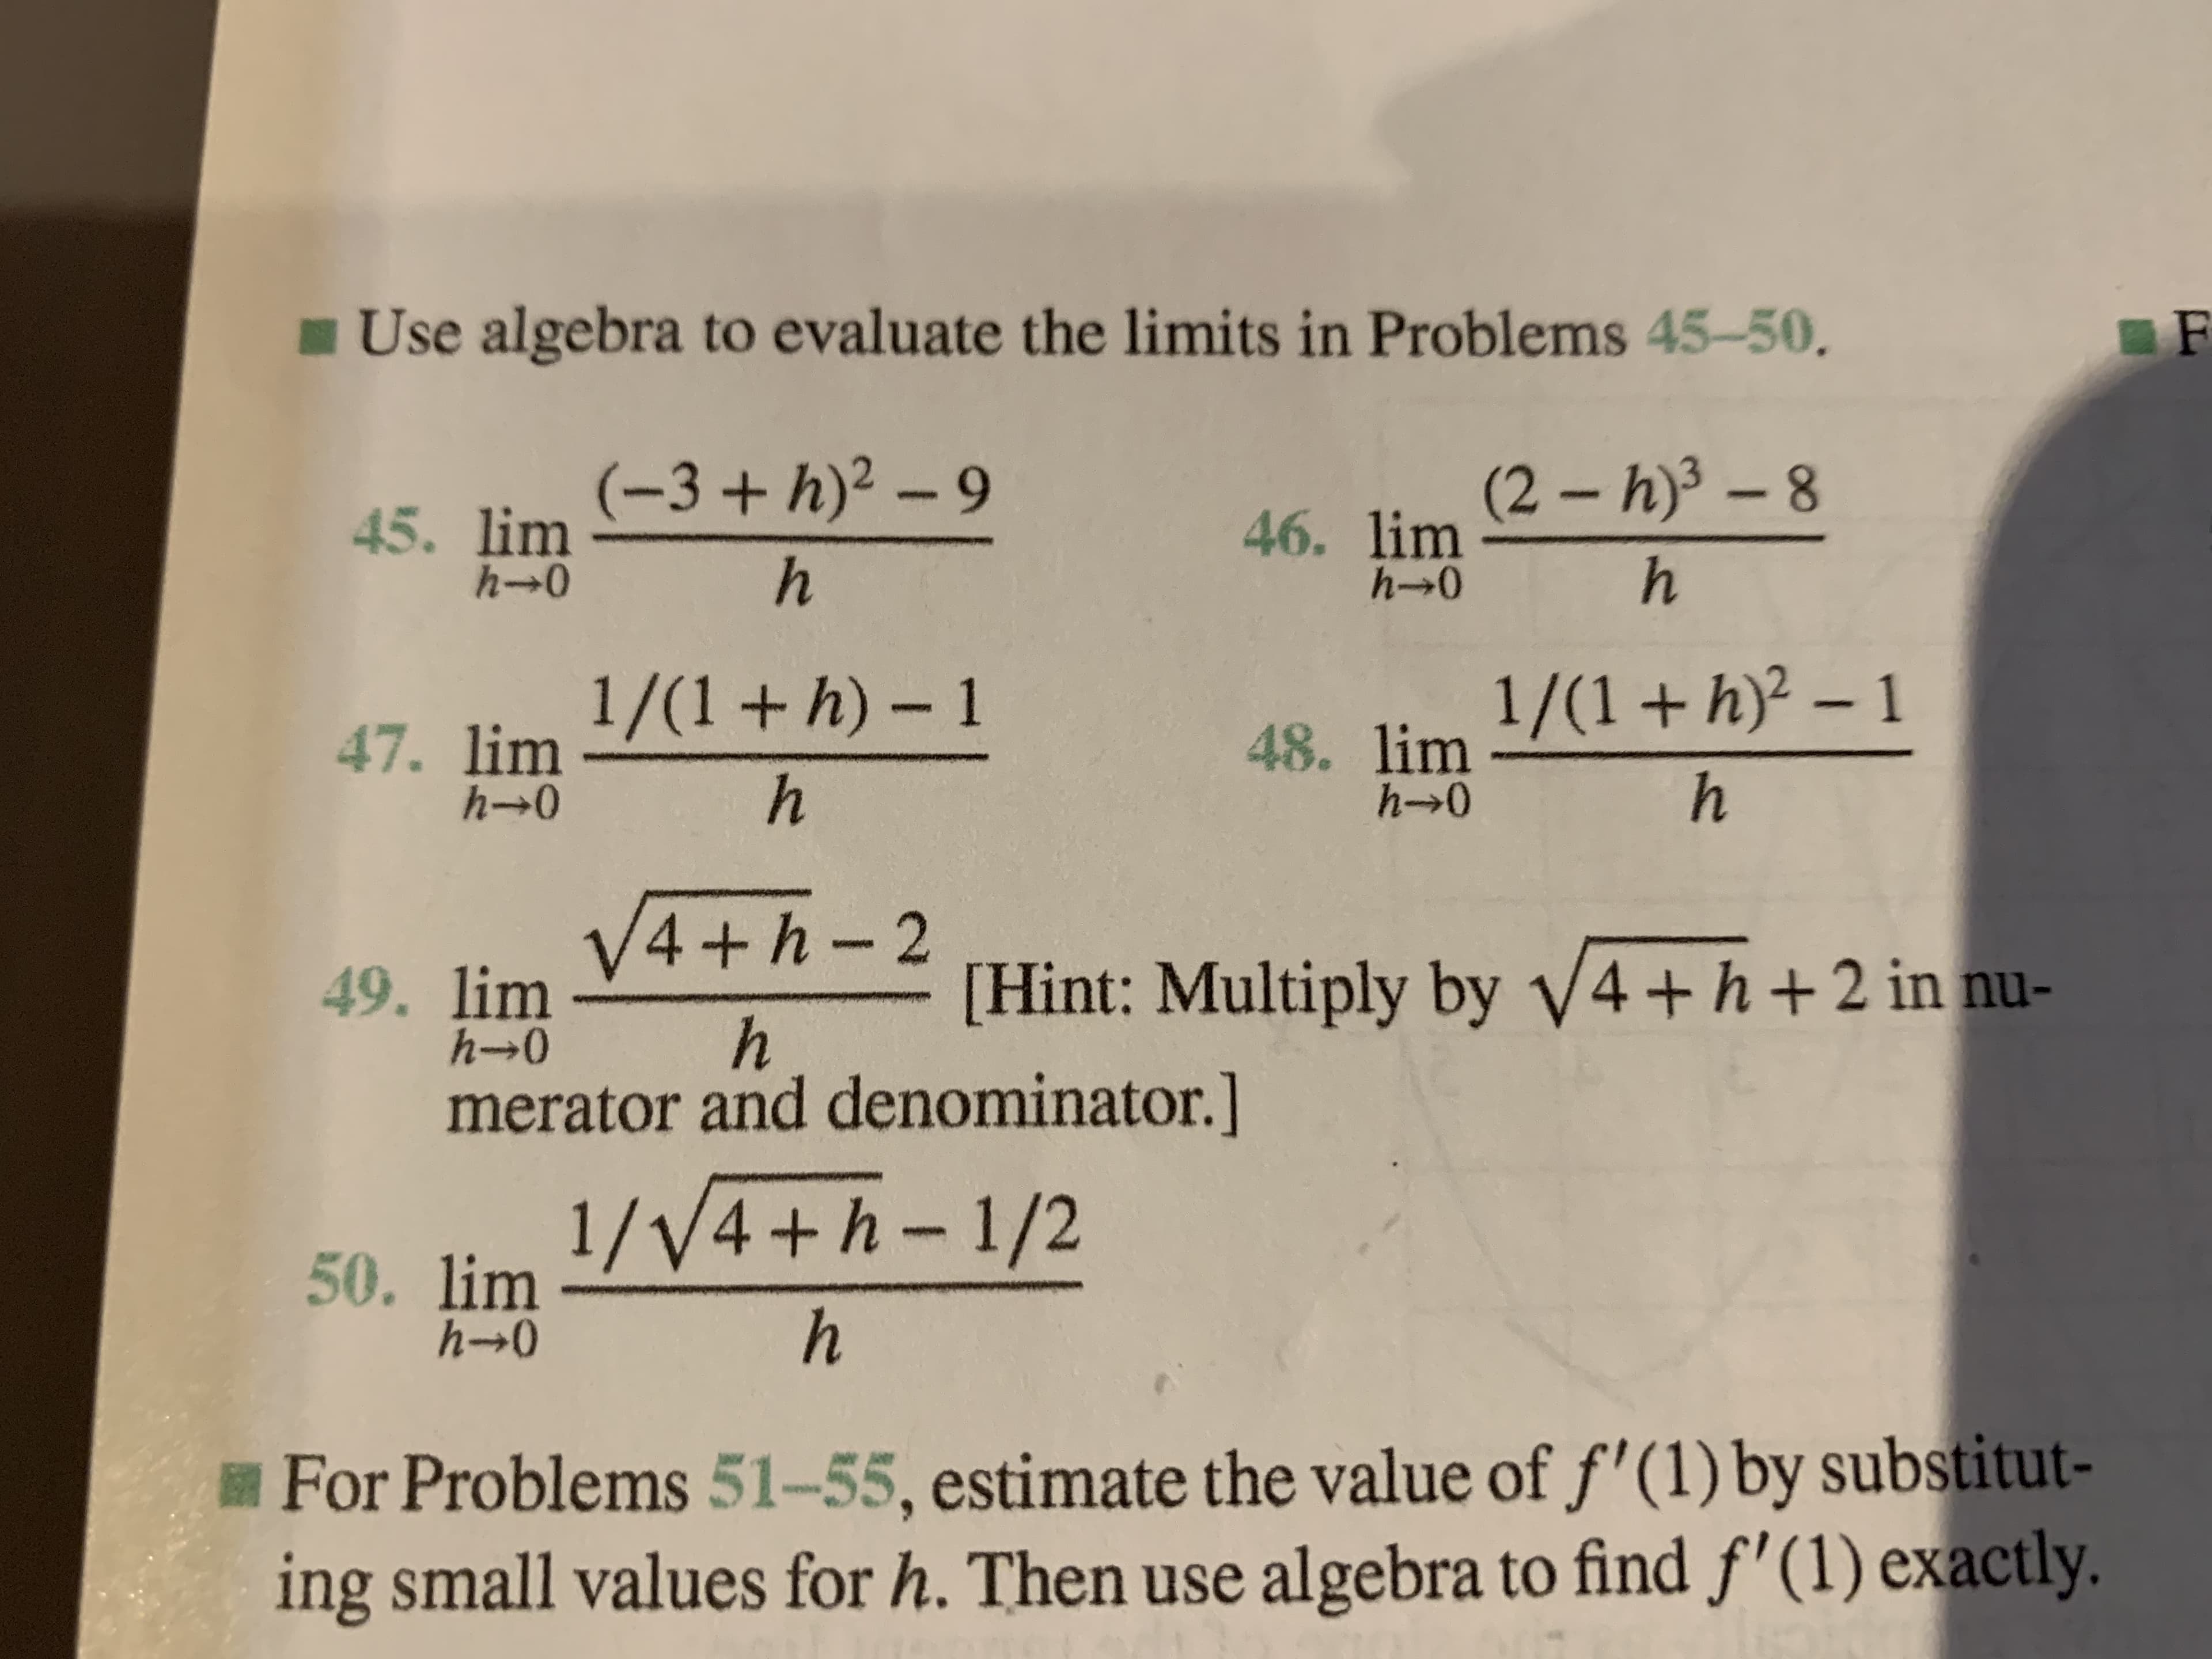 Use algebra to evaluate the limits in Problems 45-50.
F
45. lim3+h)2 -9
h
46. lim 2-h)3 -8
h
45. lim
h-o
h 0
47. lim +h) 1
h
48. lim /(1+h)2 - 1
h
h-0
h- 0
49. limV4 h-2
h
[Hint: Multiply by V4+ h+2 in nu-
h-o
merator and denominator.]
50. limV4+h-1/2
hO
For Problems 51-55, estimate the value of f'(1) by substitut-
ing small values for h. Then use algebra to find f'(1) exactly.
